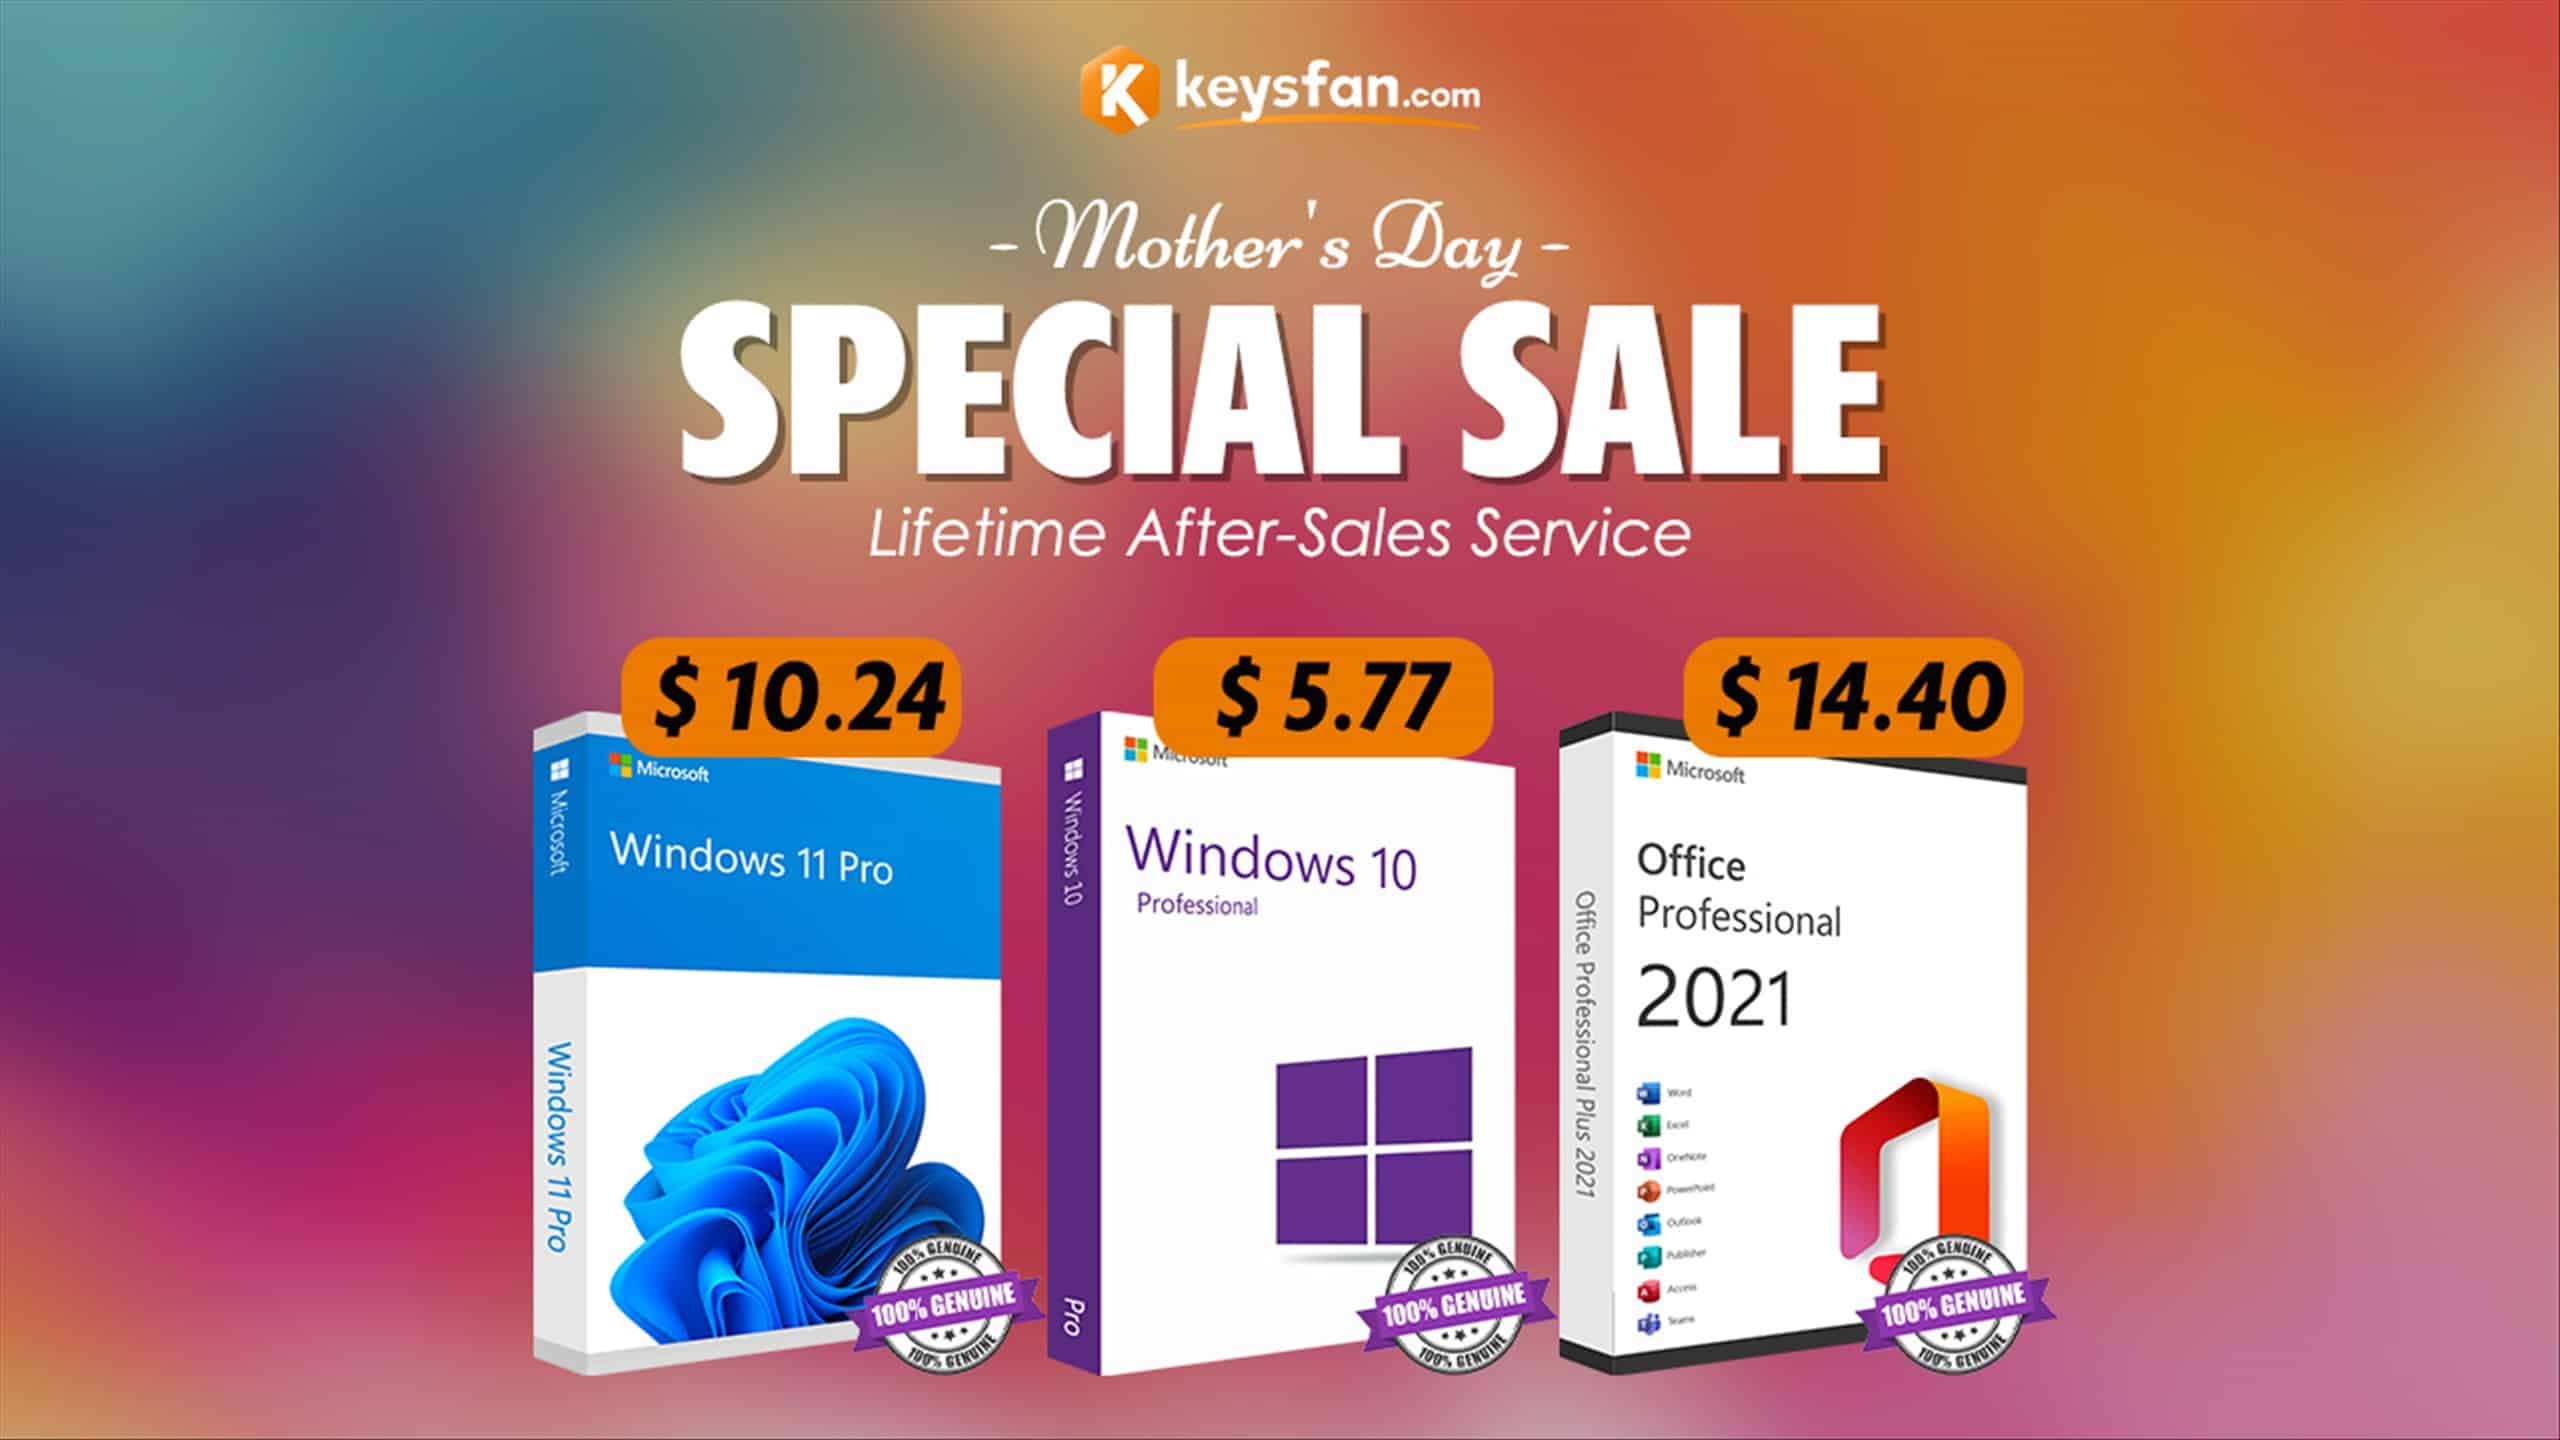 Mother’s Day Sale: Genuine Office 2021 only for $14.4! Limited time special offer, only for one week?